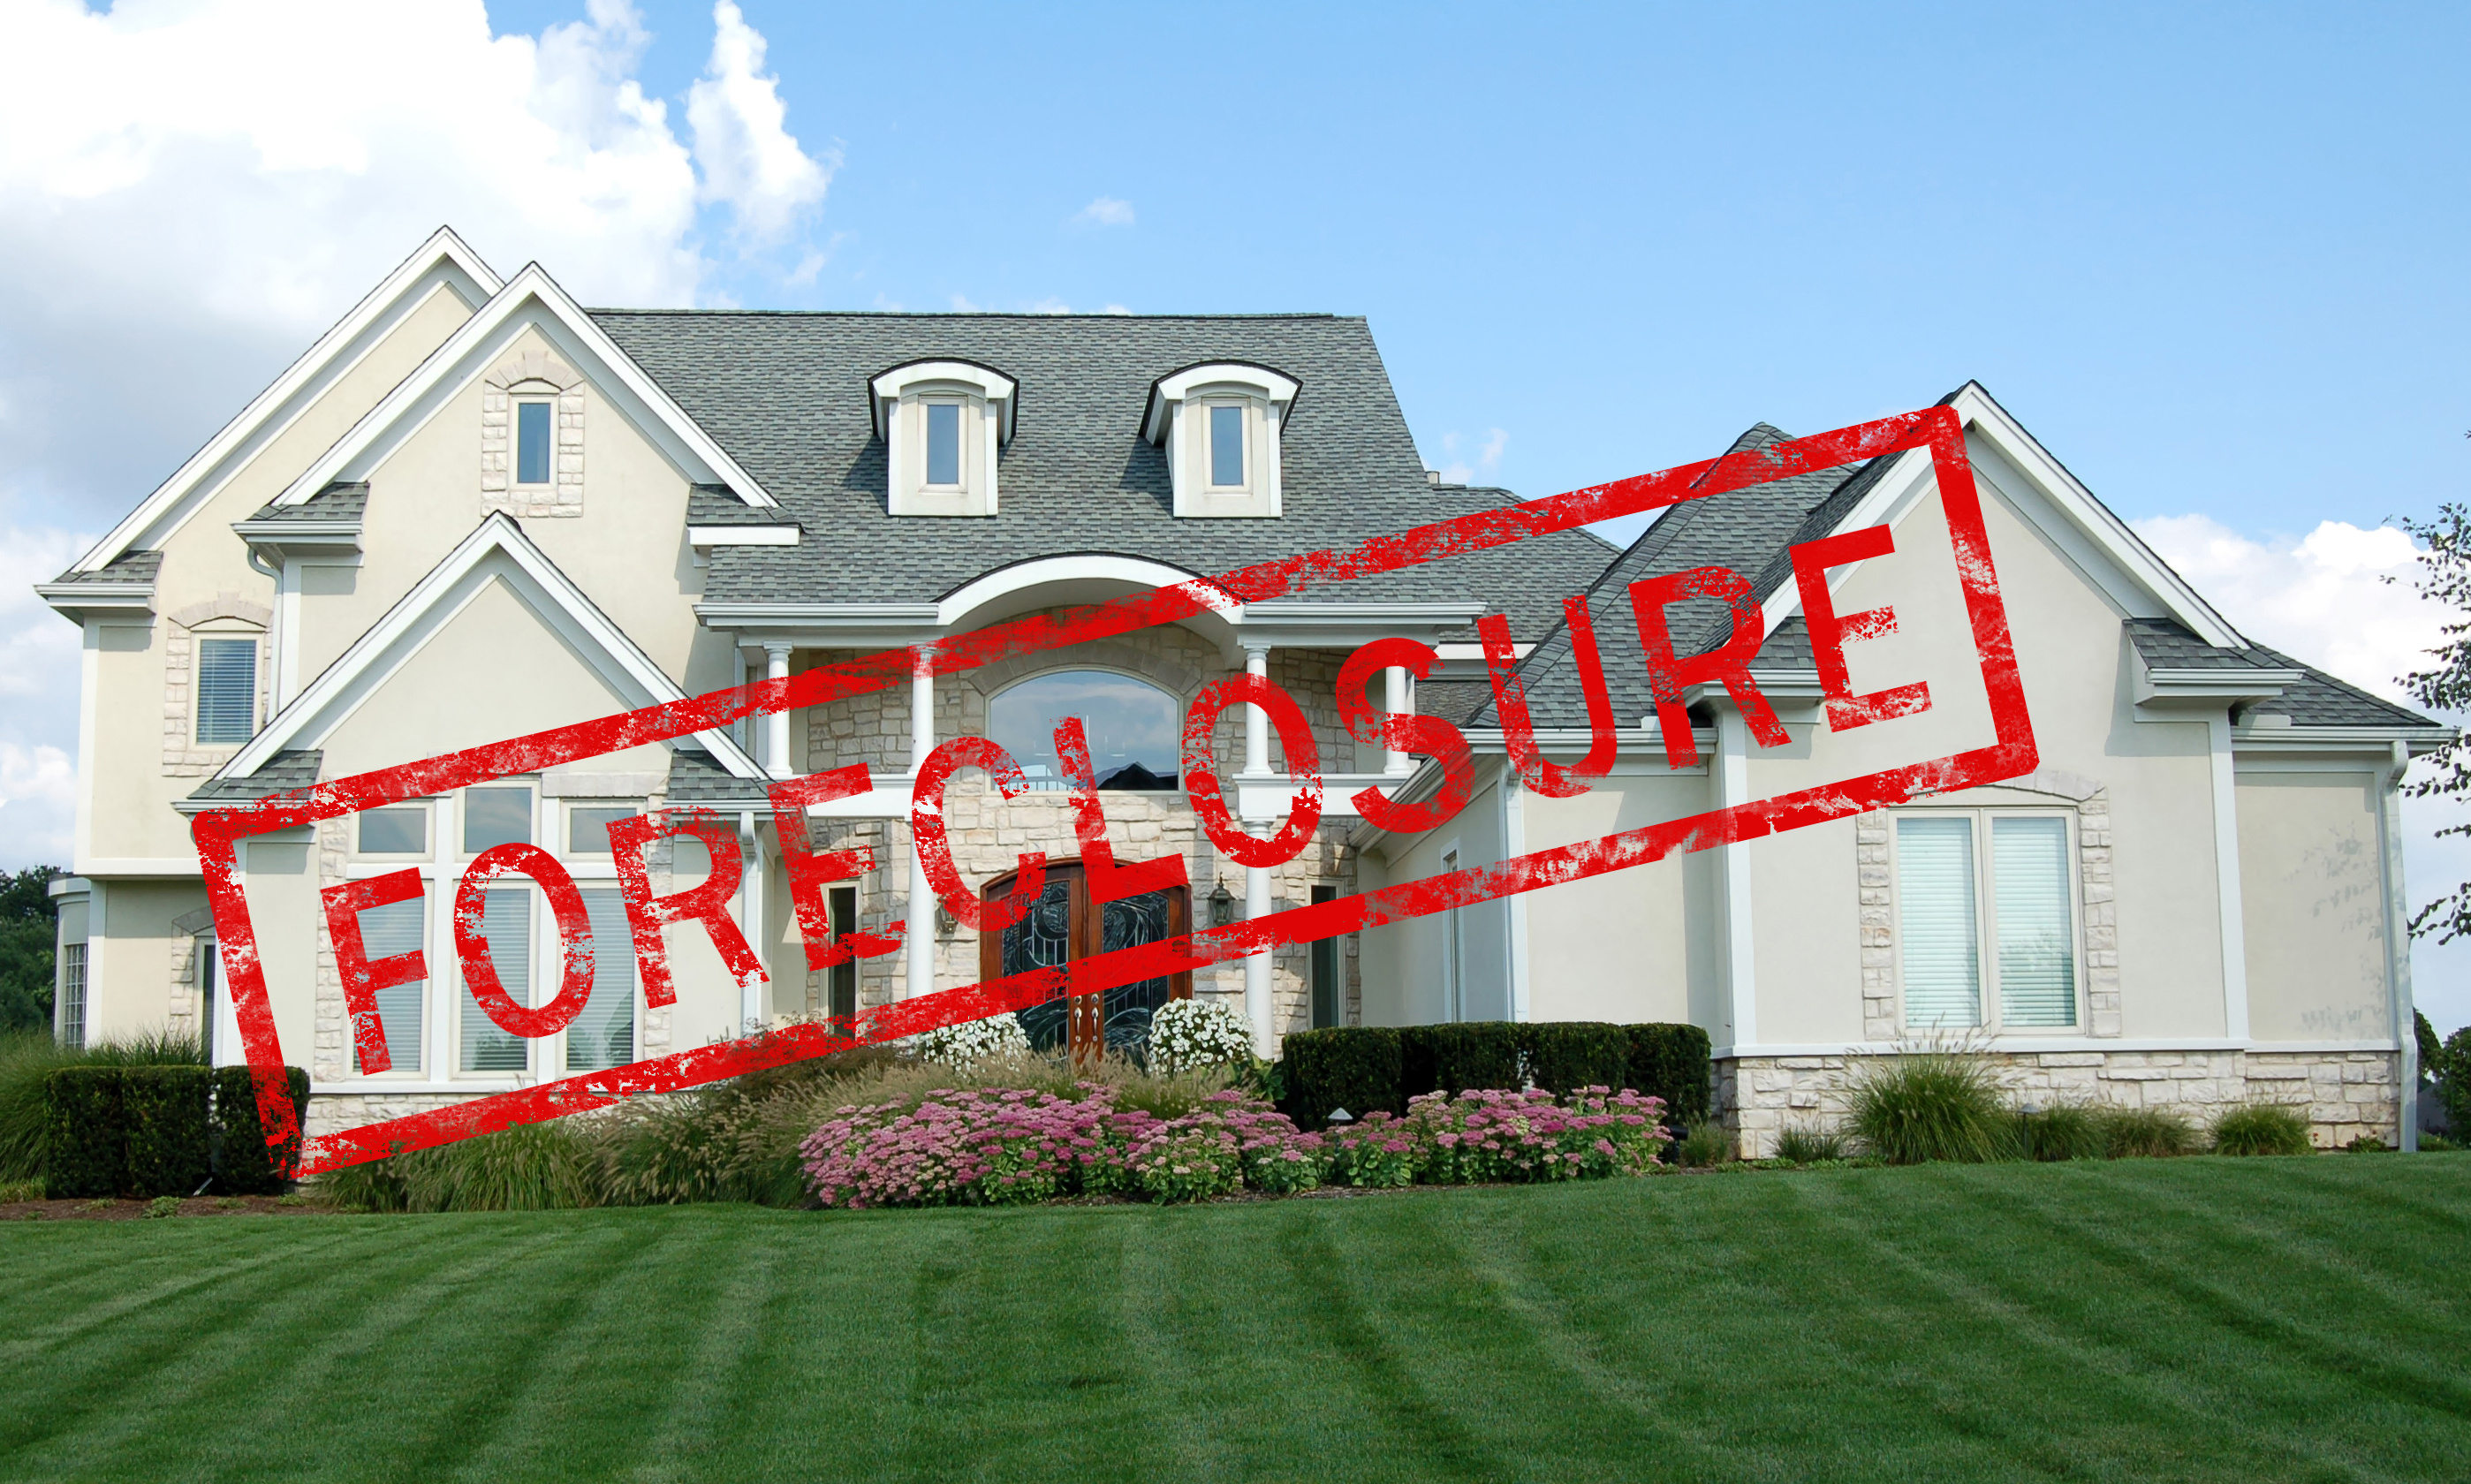 Call Village Appraisal Ltd. to order appraisals for Fairfield foreclosures